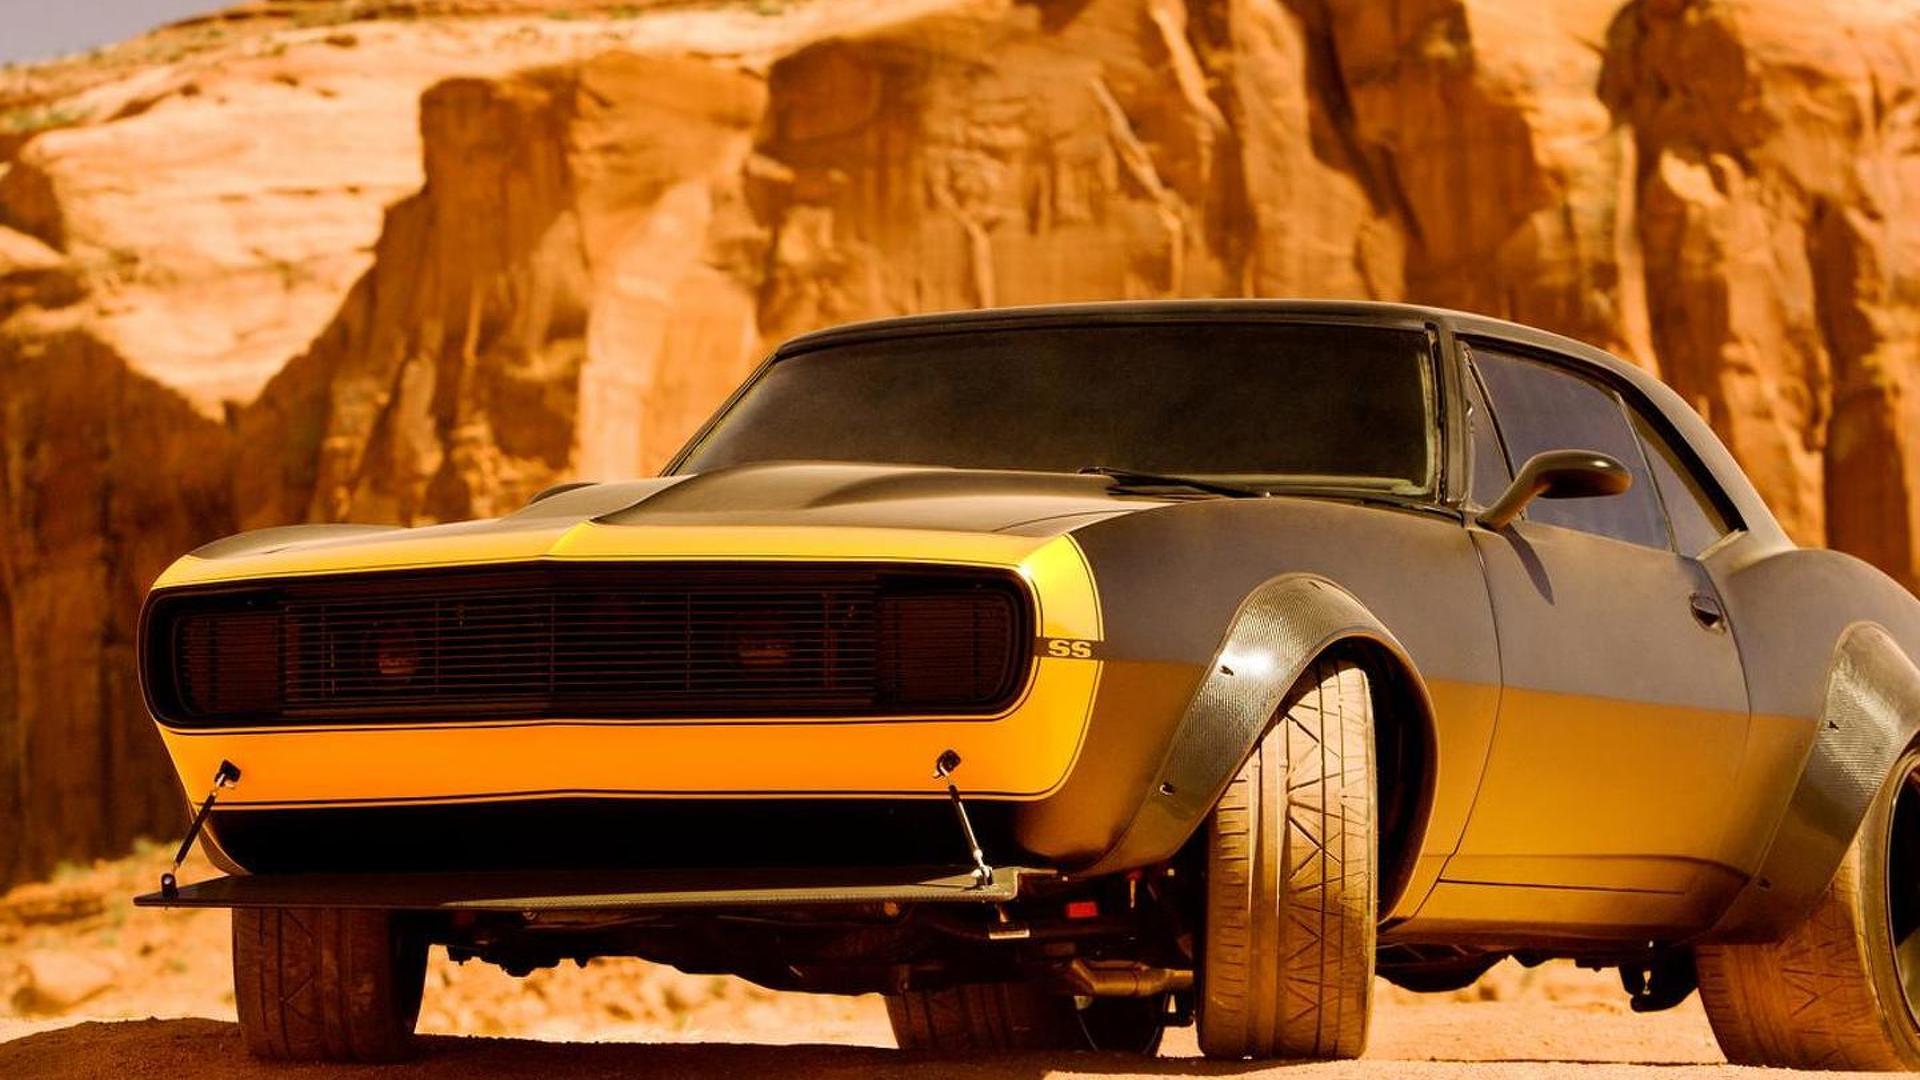 Chevrolet Camaro SS starring in Transformers 4 as Bumblebee